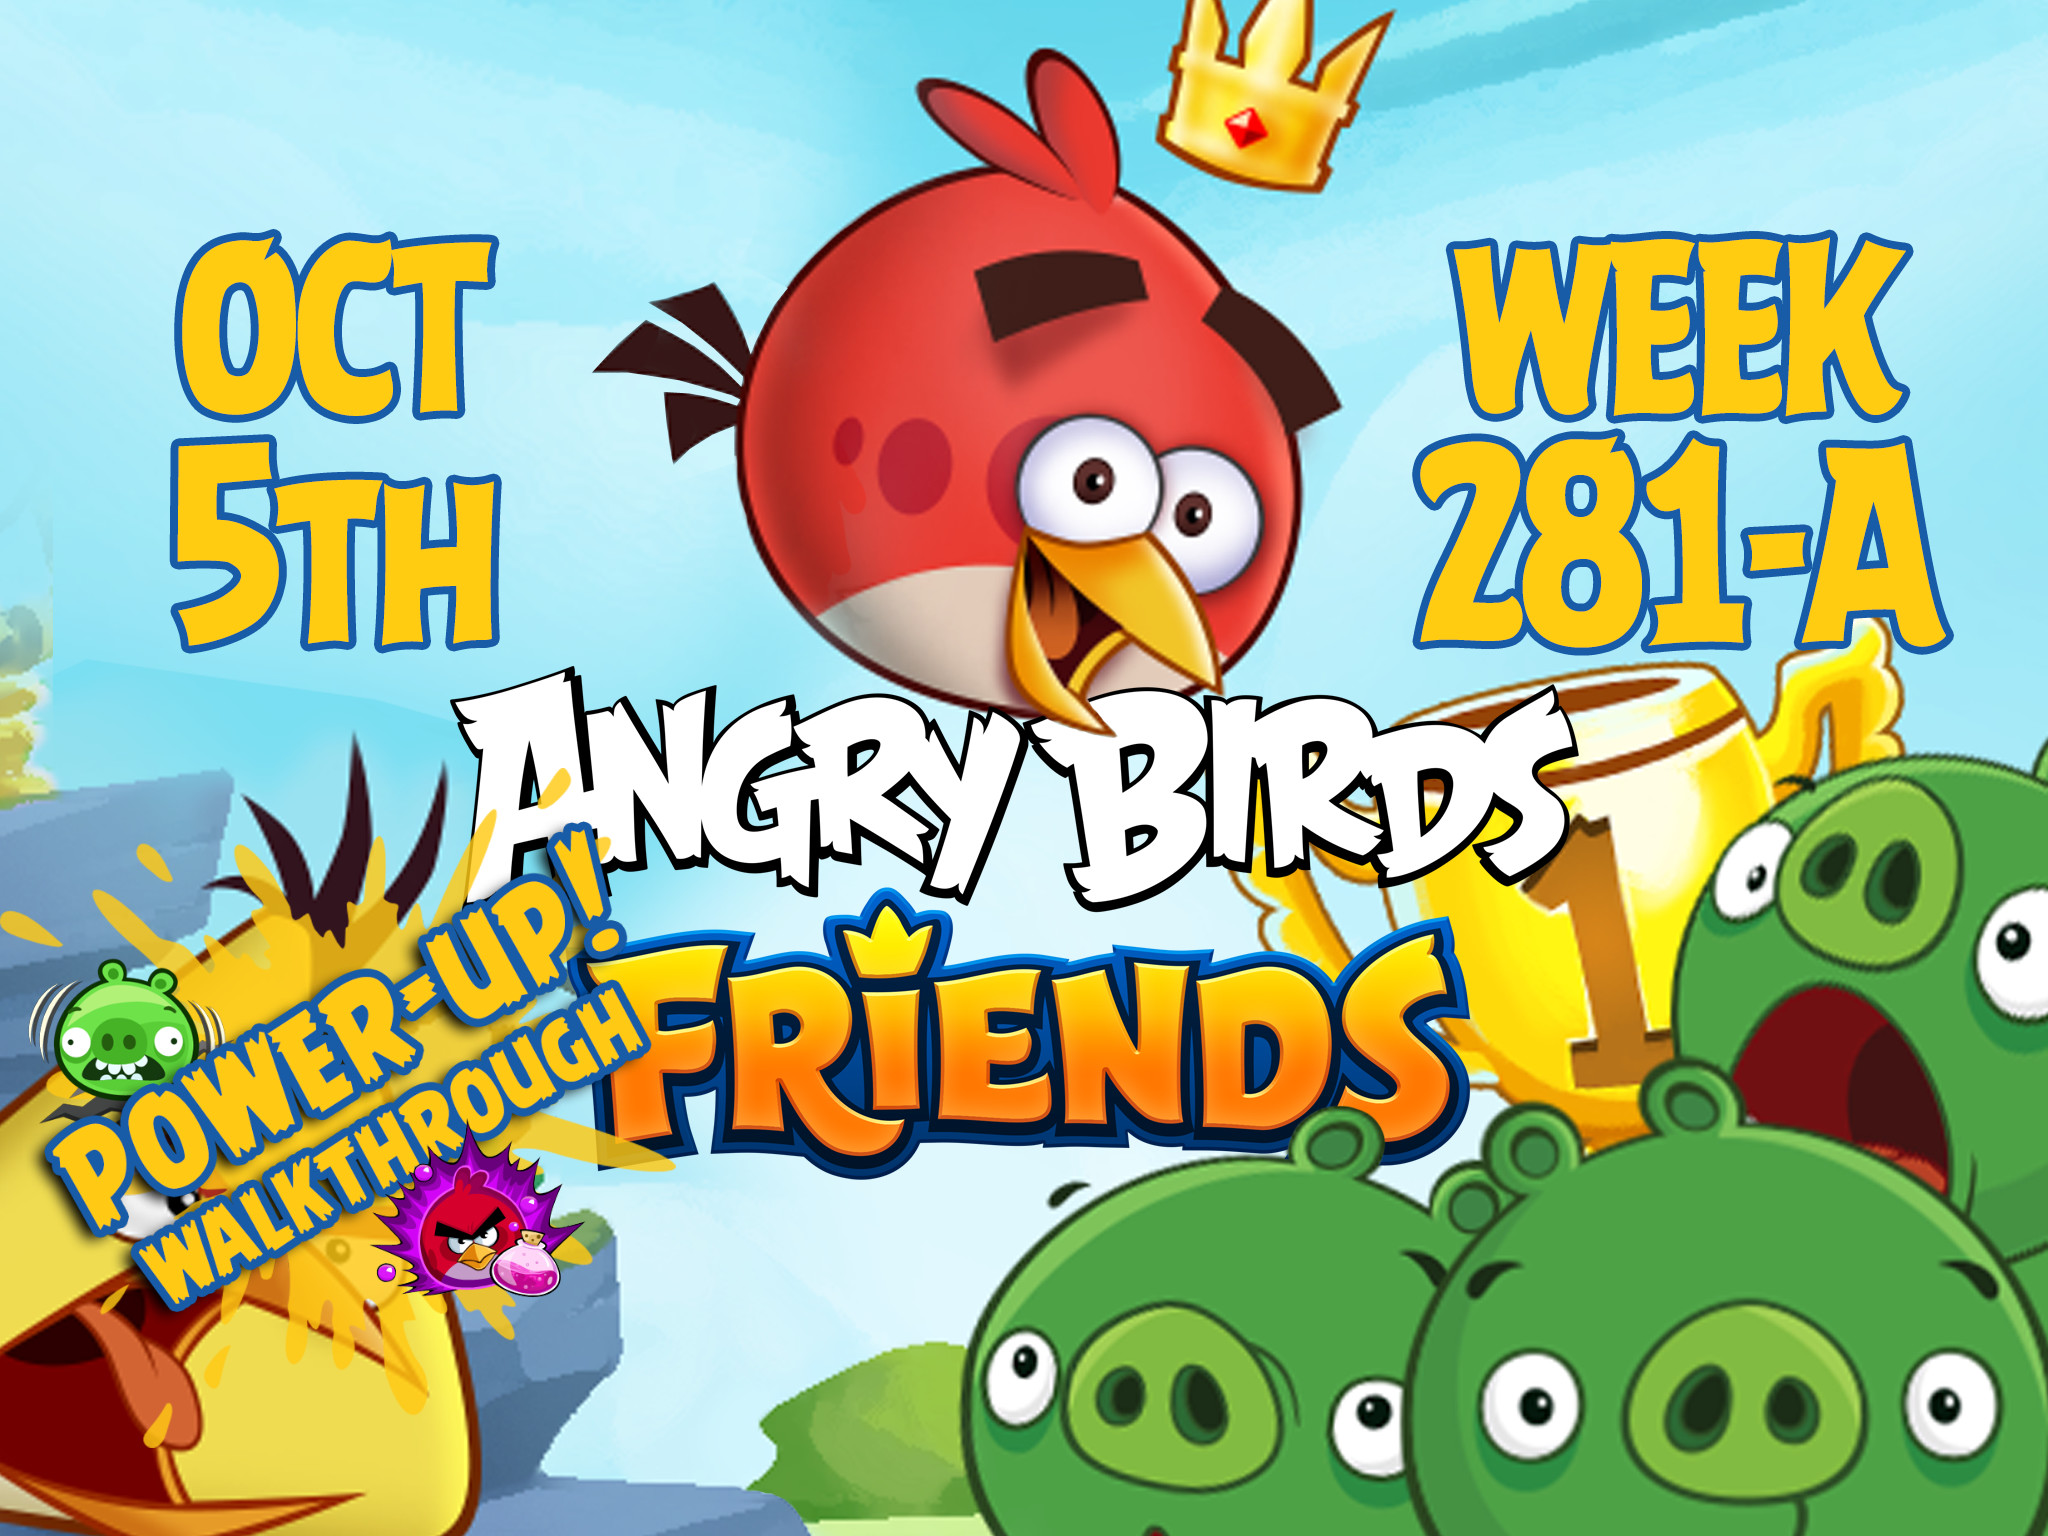 Angry Birds Friends Tournament Week 281-A Feature Image PU